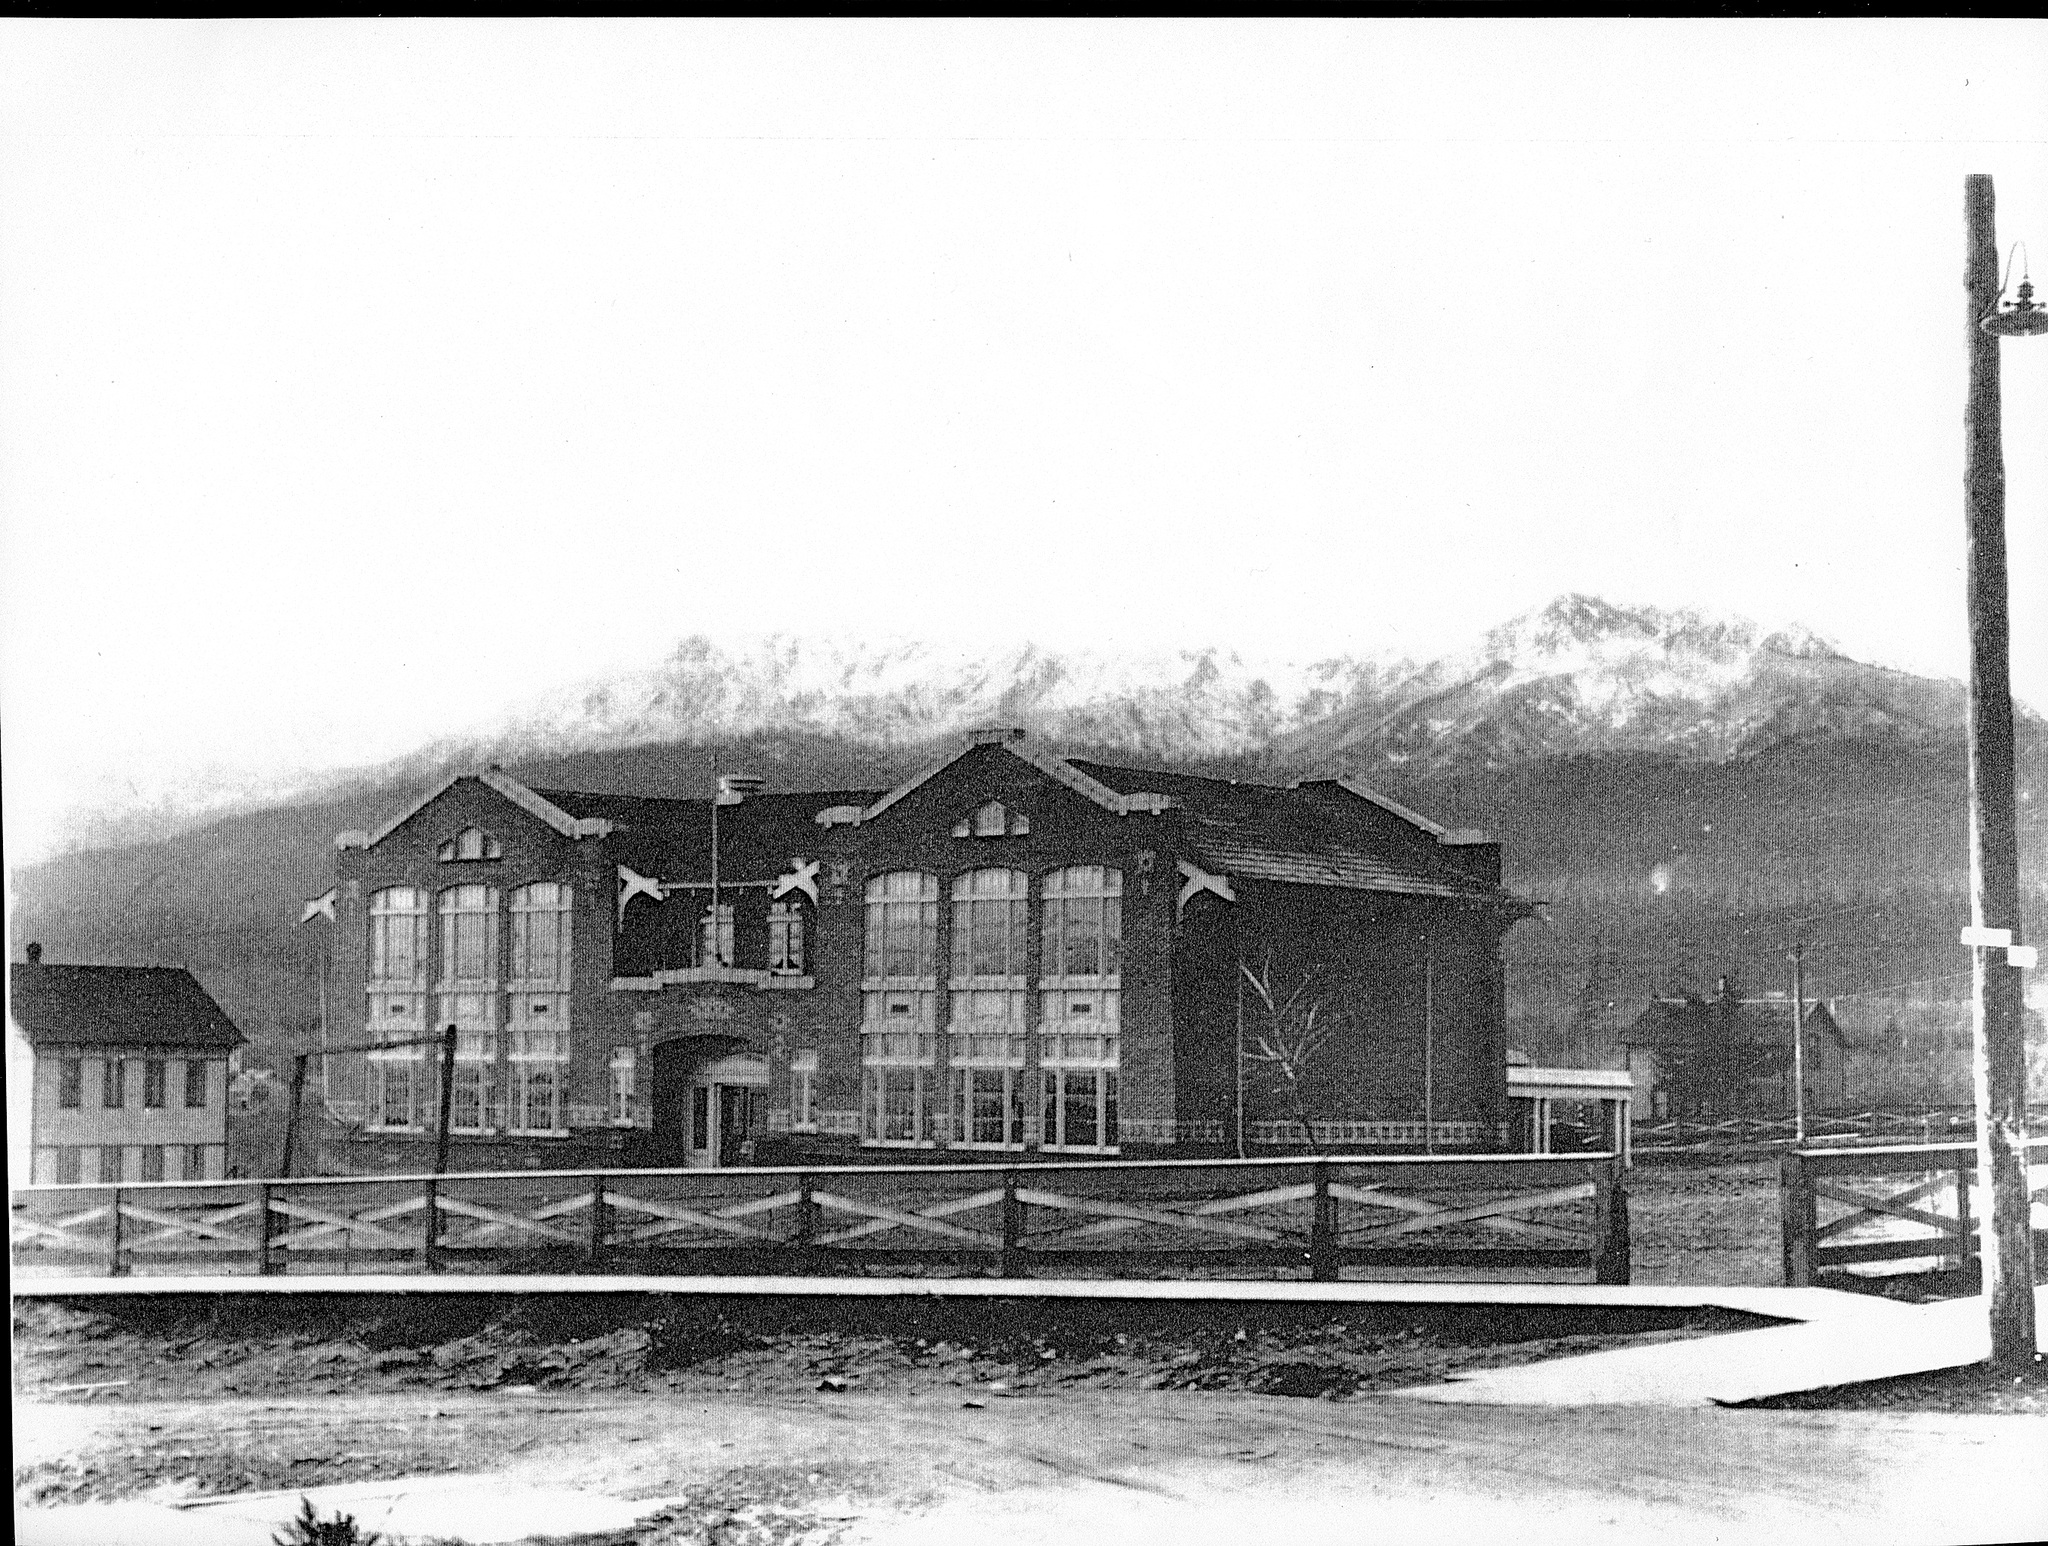 August picture from the past                                Most of you recognize this old school, and I hope you will send your memories and comments in to be included in the September column. This year celebrates 100 years for this school, and there will be an open house to commemorate this special anniversary. Write to bretches1942@gmail.com or to Alice Alexander at 204 W. Fourth St., Apt 14, Port Angeles, WA 98362, with your memories to be included in the September column.